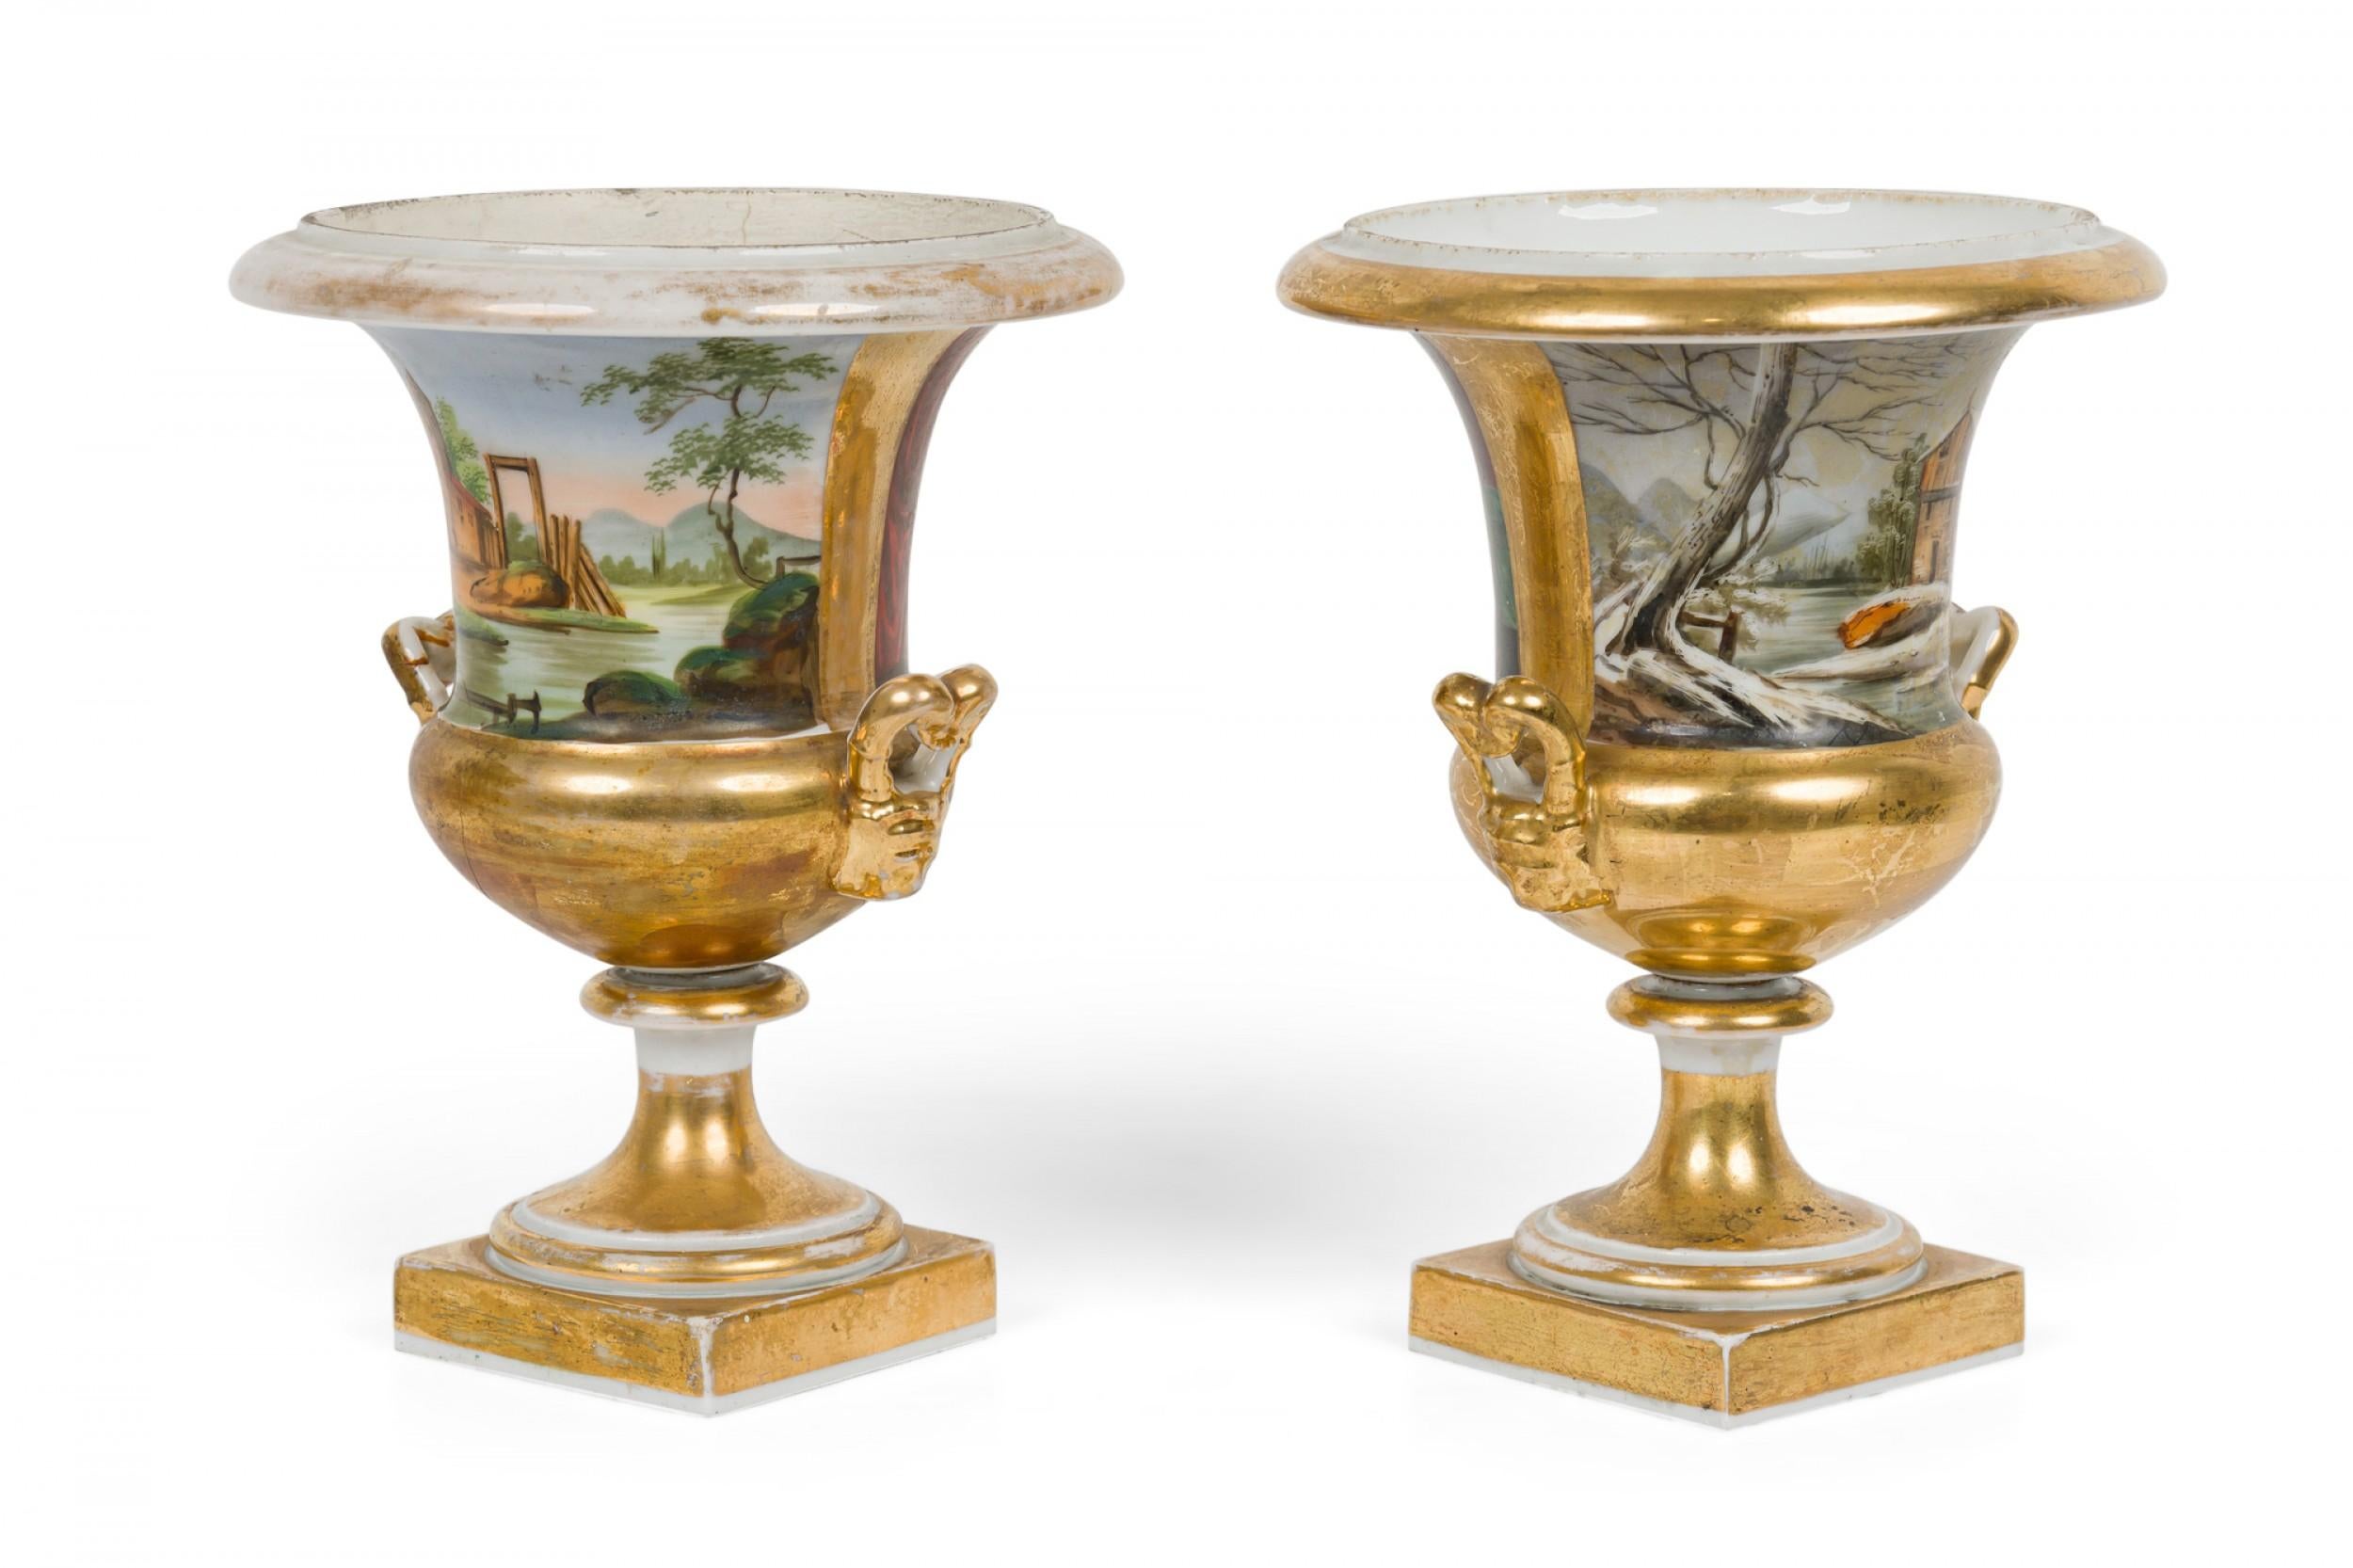 PAIR of French (19th century) Sevre porcelain urns featuring painted pastoral scenes on one side and genre scenes on the reverse, with gilt trim, handles and bases, resting on square porcelain bases. (PRICED AS PAIR).